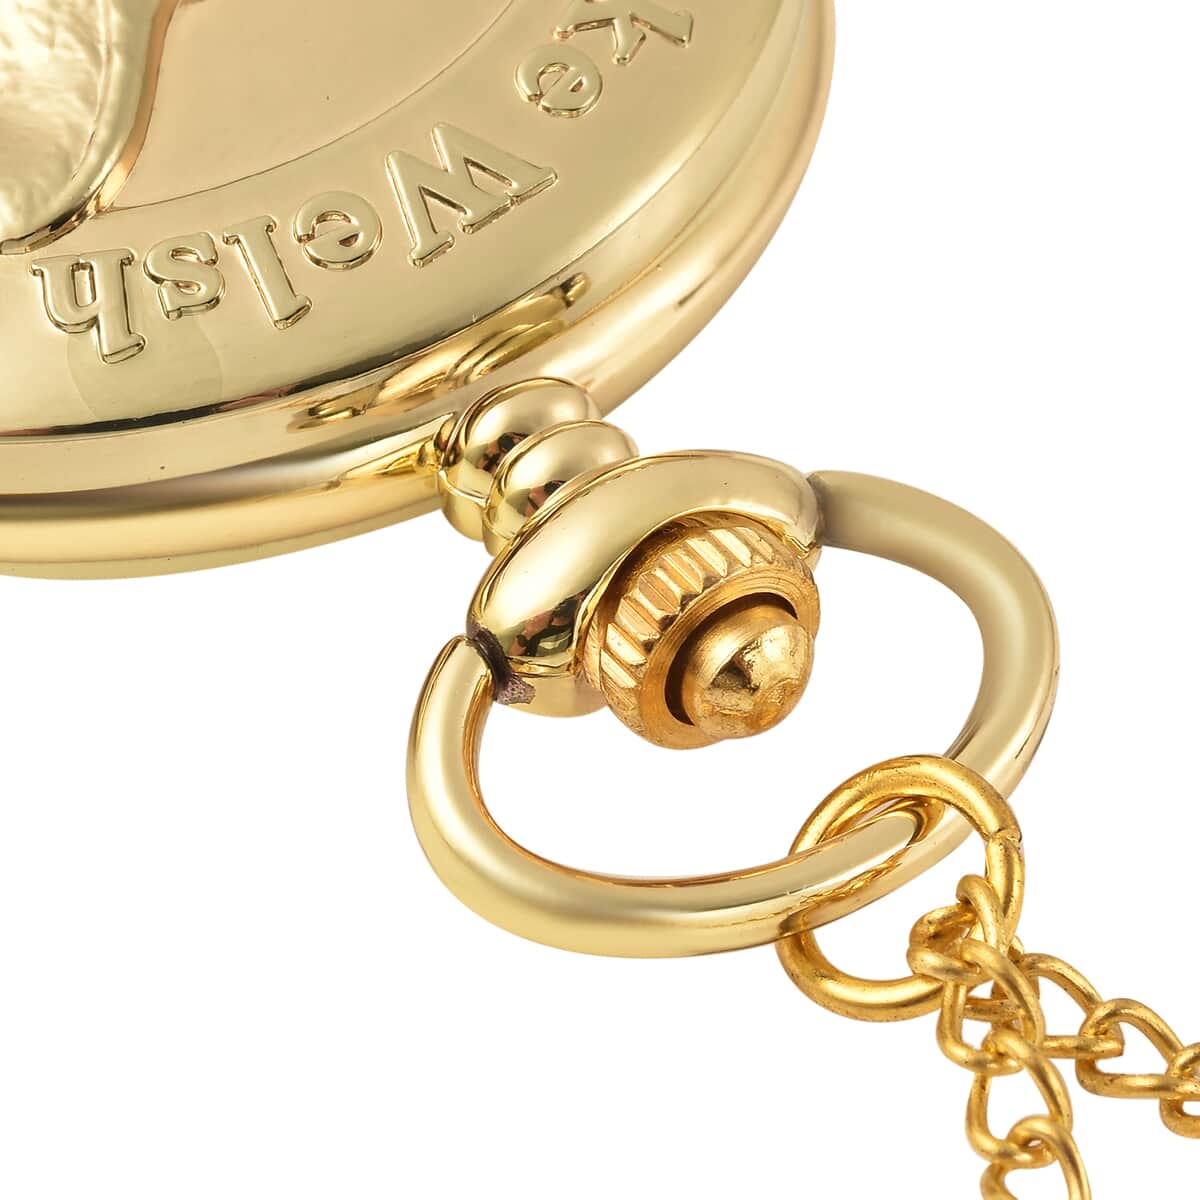 Strada Japanese Movement Corgi Pocket Watch in Goldtone with Chain (31 Inches) image number 5